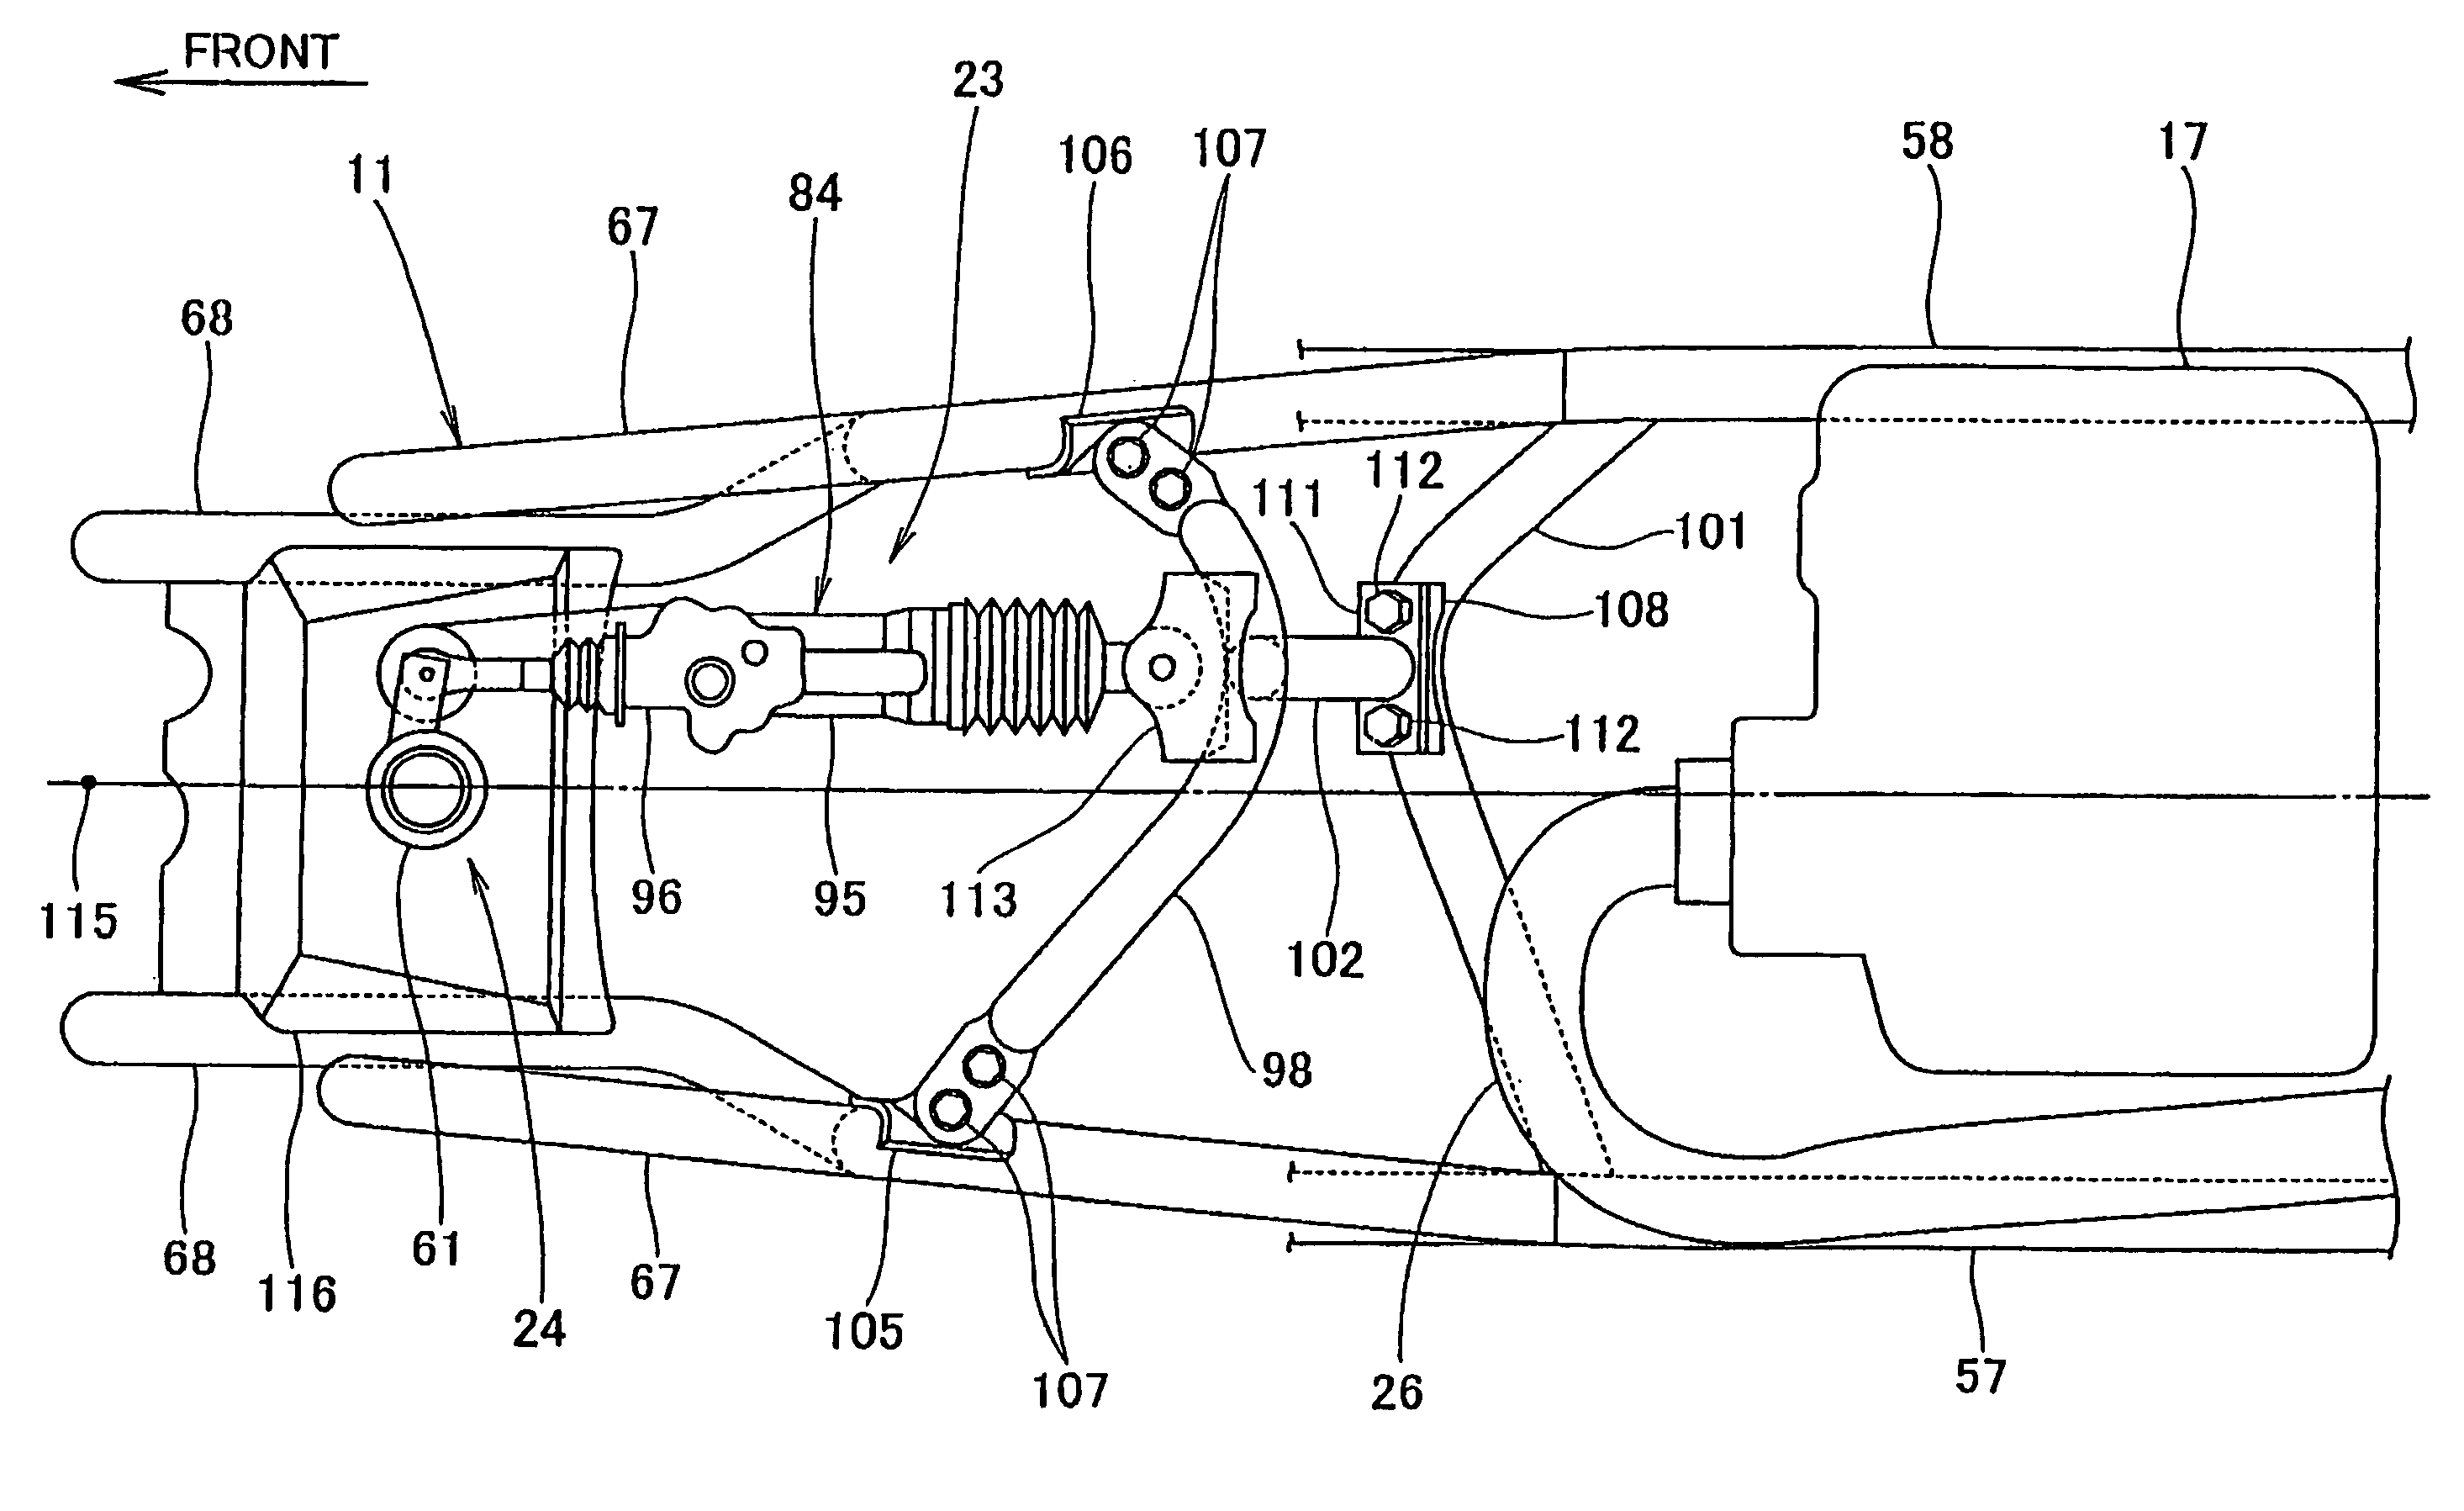 Layout structure of power steering system for vehicle